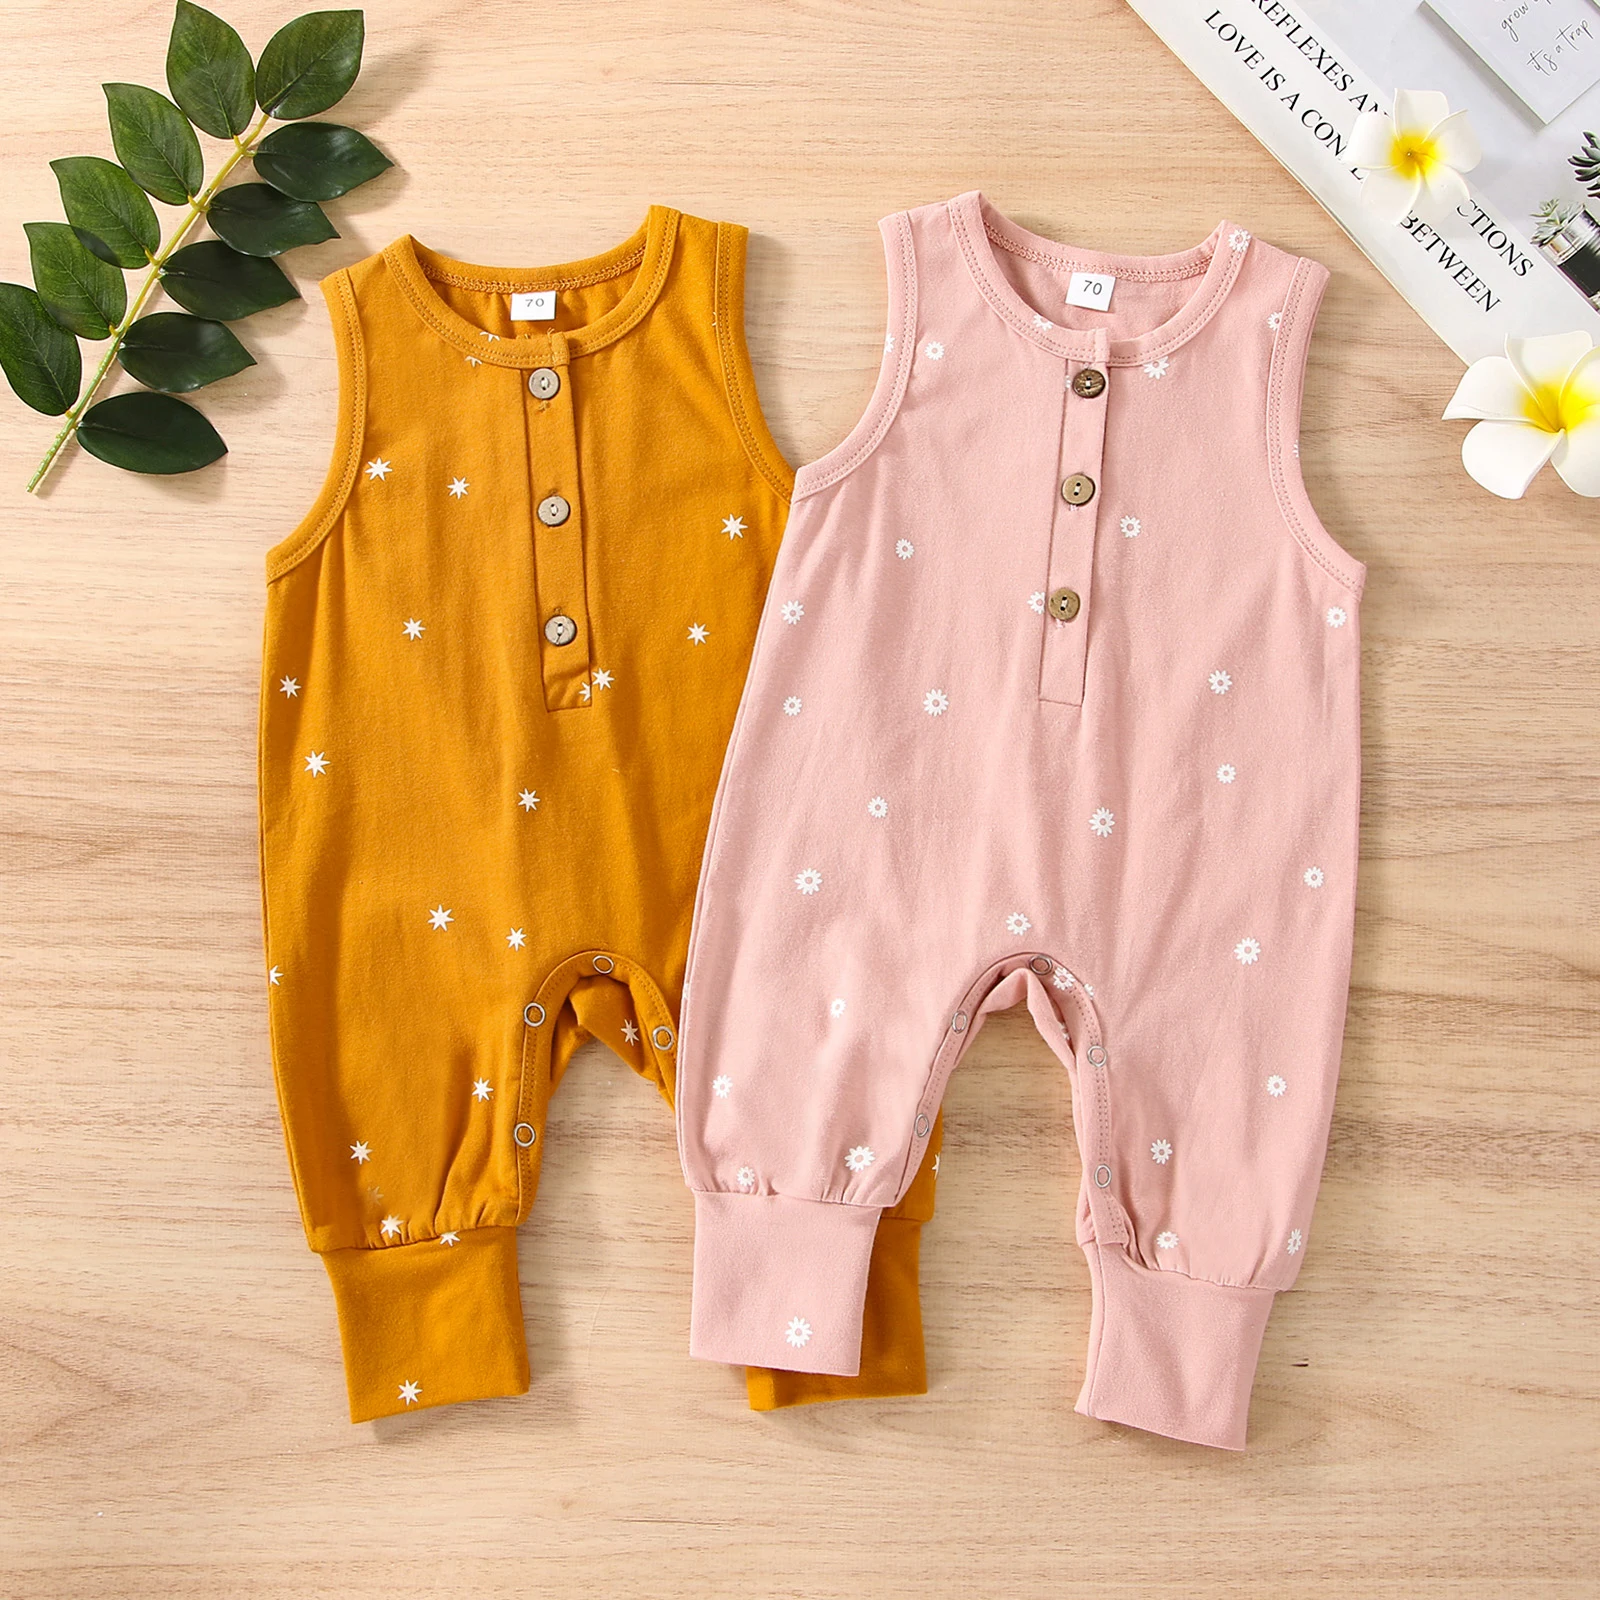 Infant Baby Girls Boys Romper, Star Print Round Neck Sleeveless Jumpsuit with Buttons for Summer, 0-18 Months Baby Bodysuits Fur